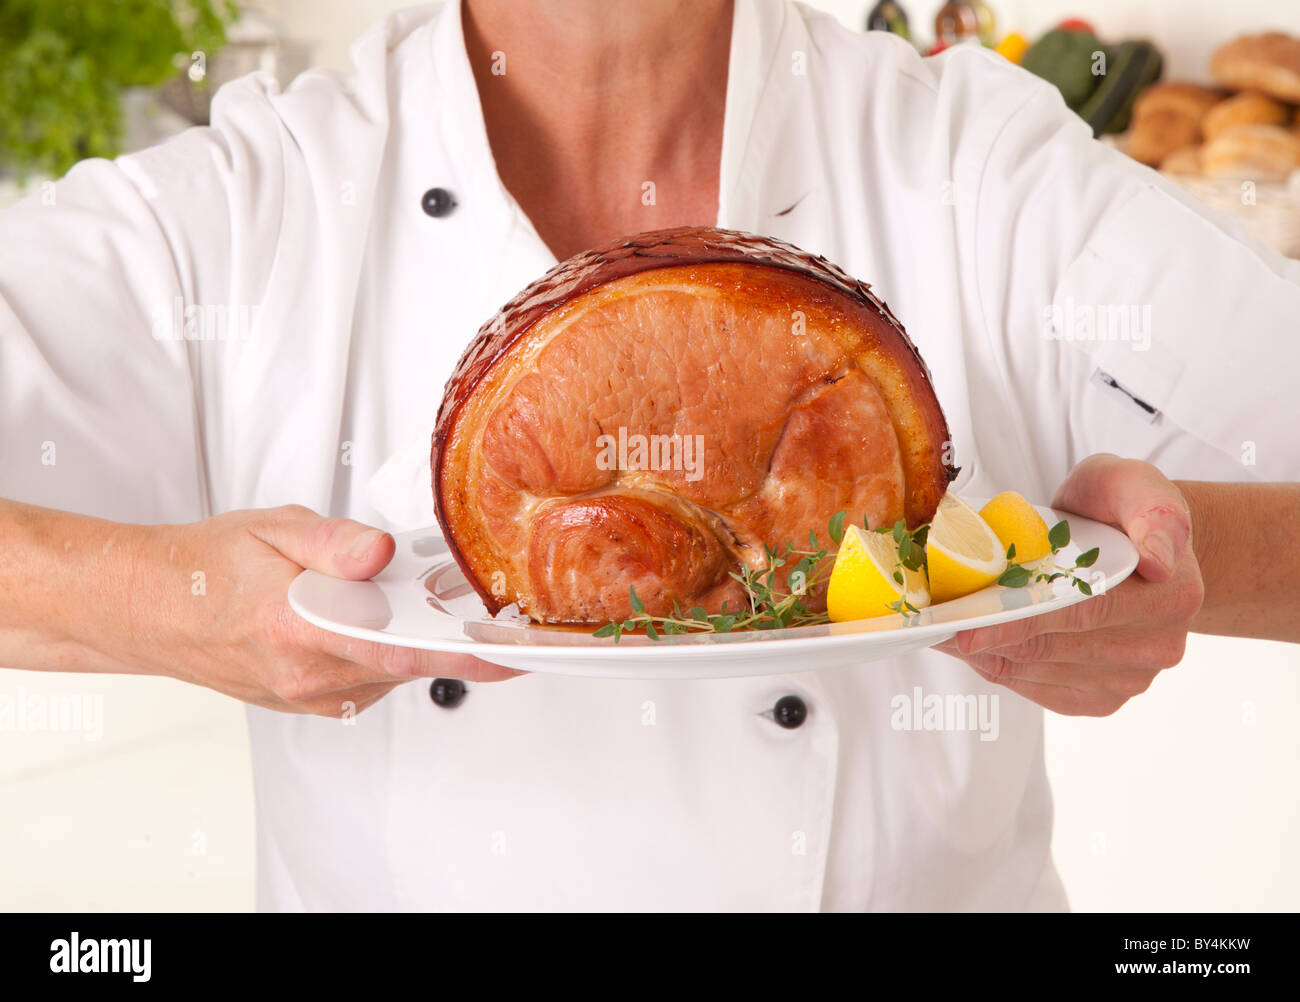 CHEF HOLDING PLATE WITH COOKED GAMMON Stock Photo